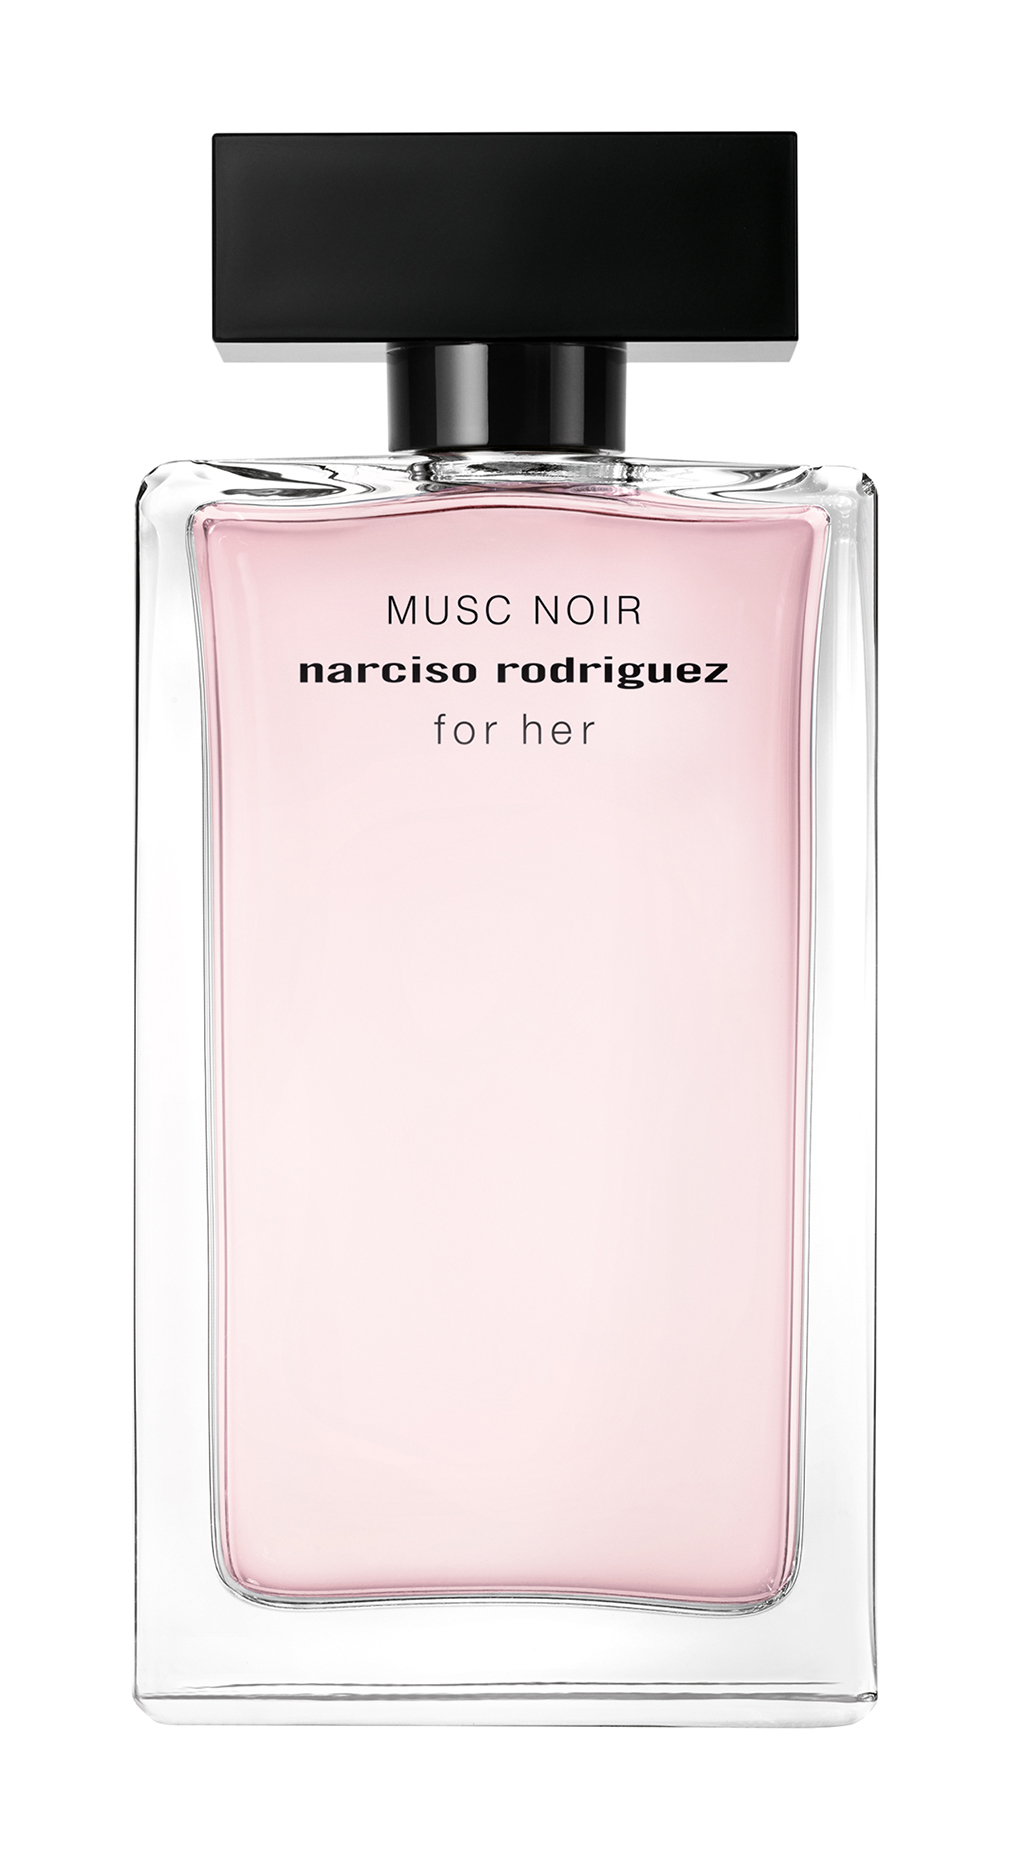 Narciso Rodriguez for her. Narciso Rodriguez Musc for her. Narciso Rodriguez for her Eau de Parfum парфюмерная вода 100 мл. Narciso Rodriguez Narciso.